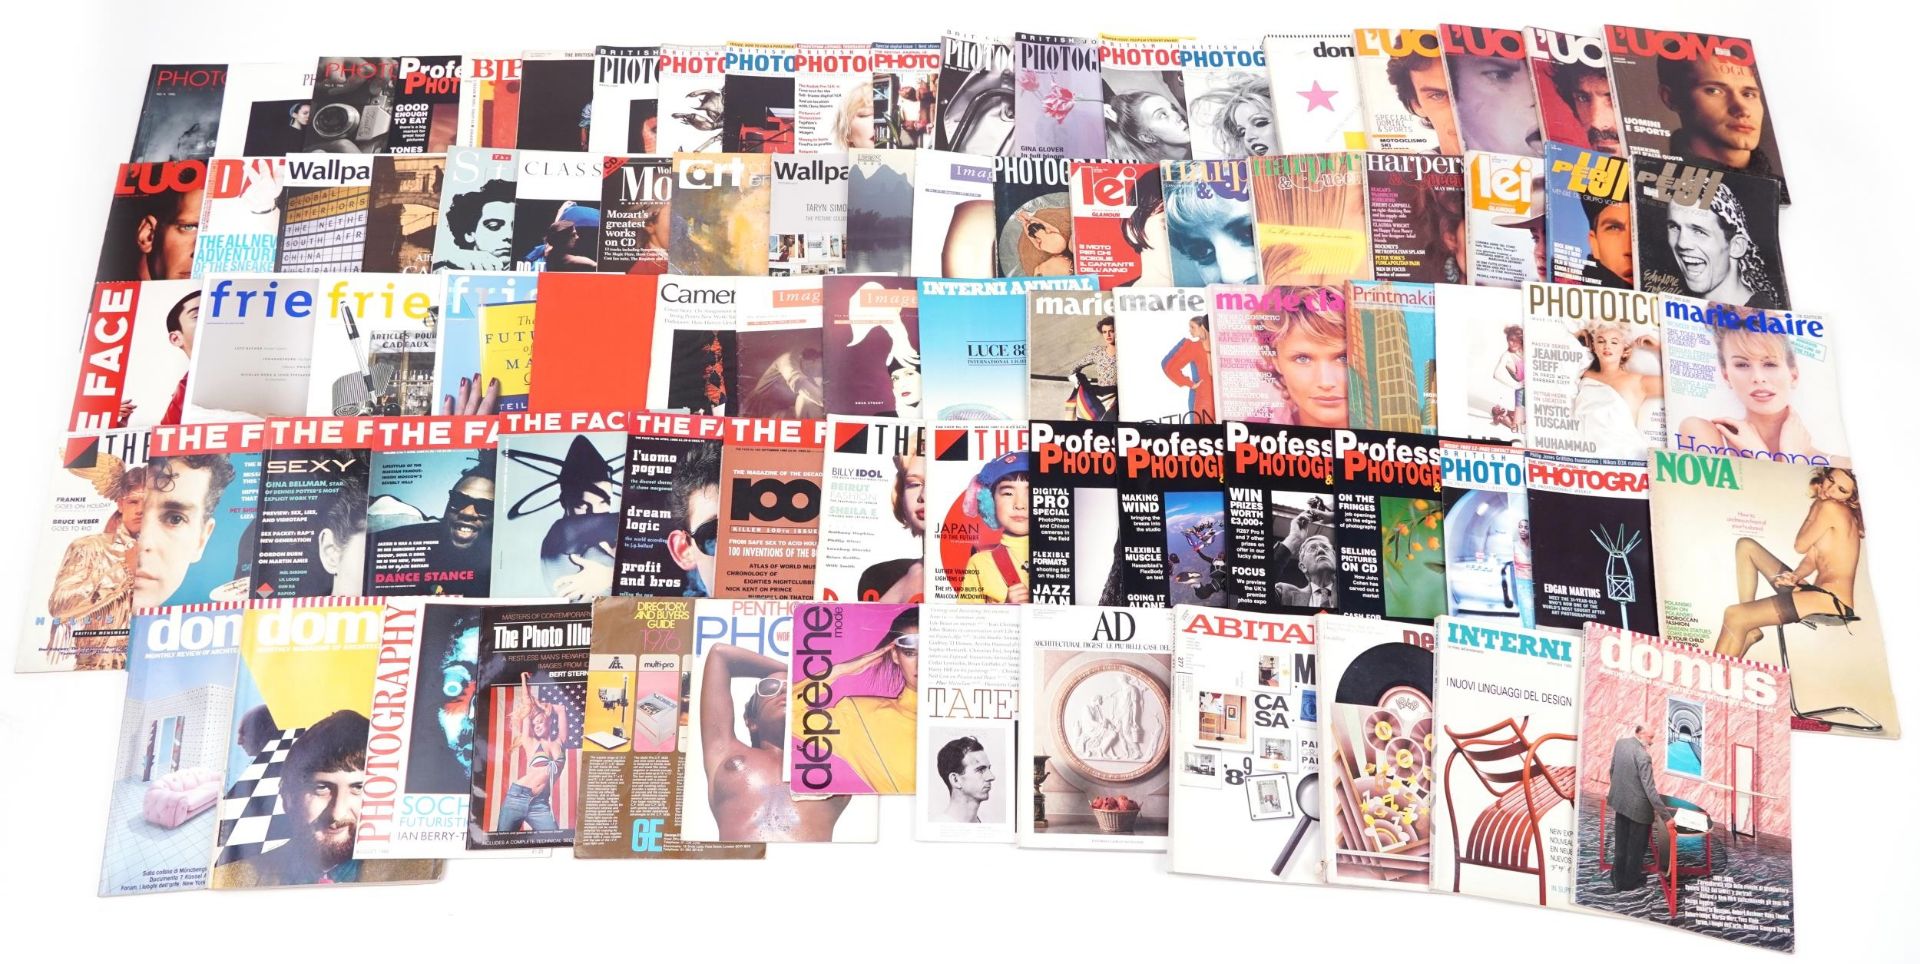 Large collection of vintage and later art photography magazines including Photo-Art, Professional